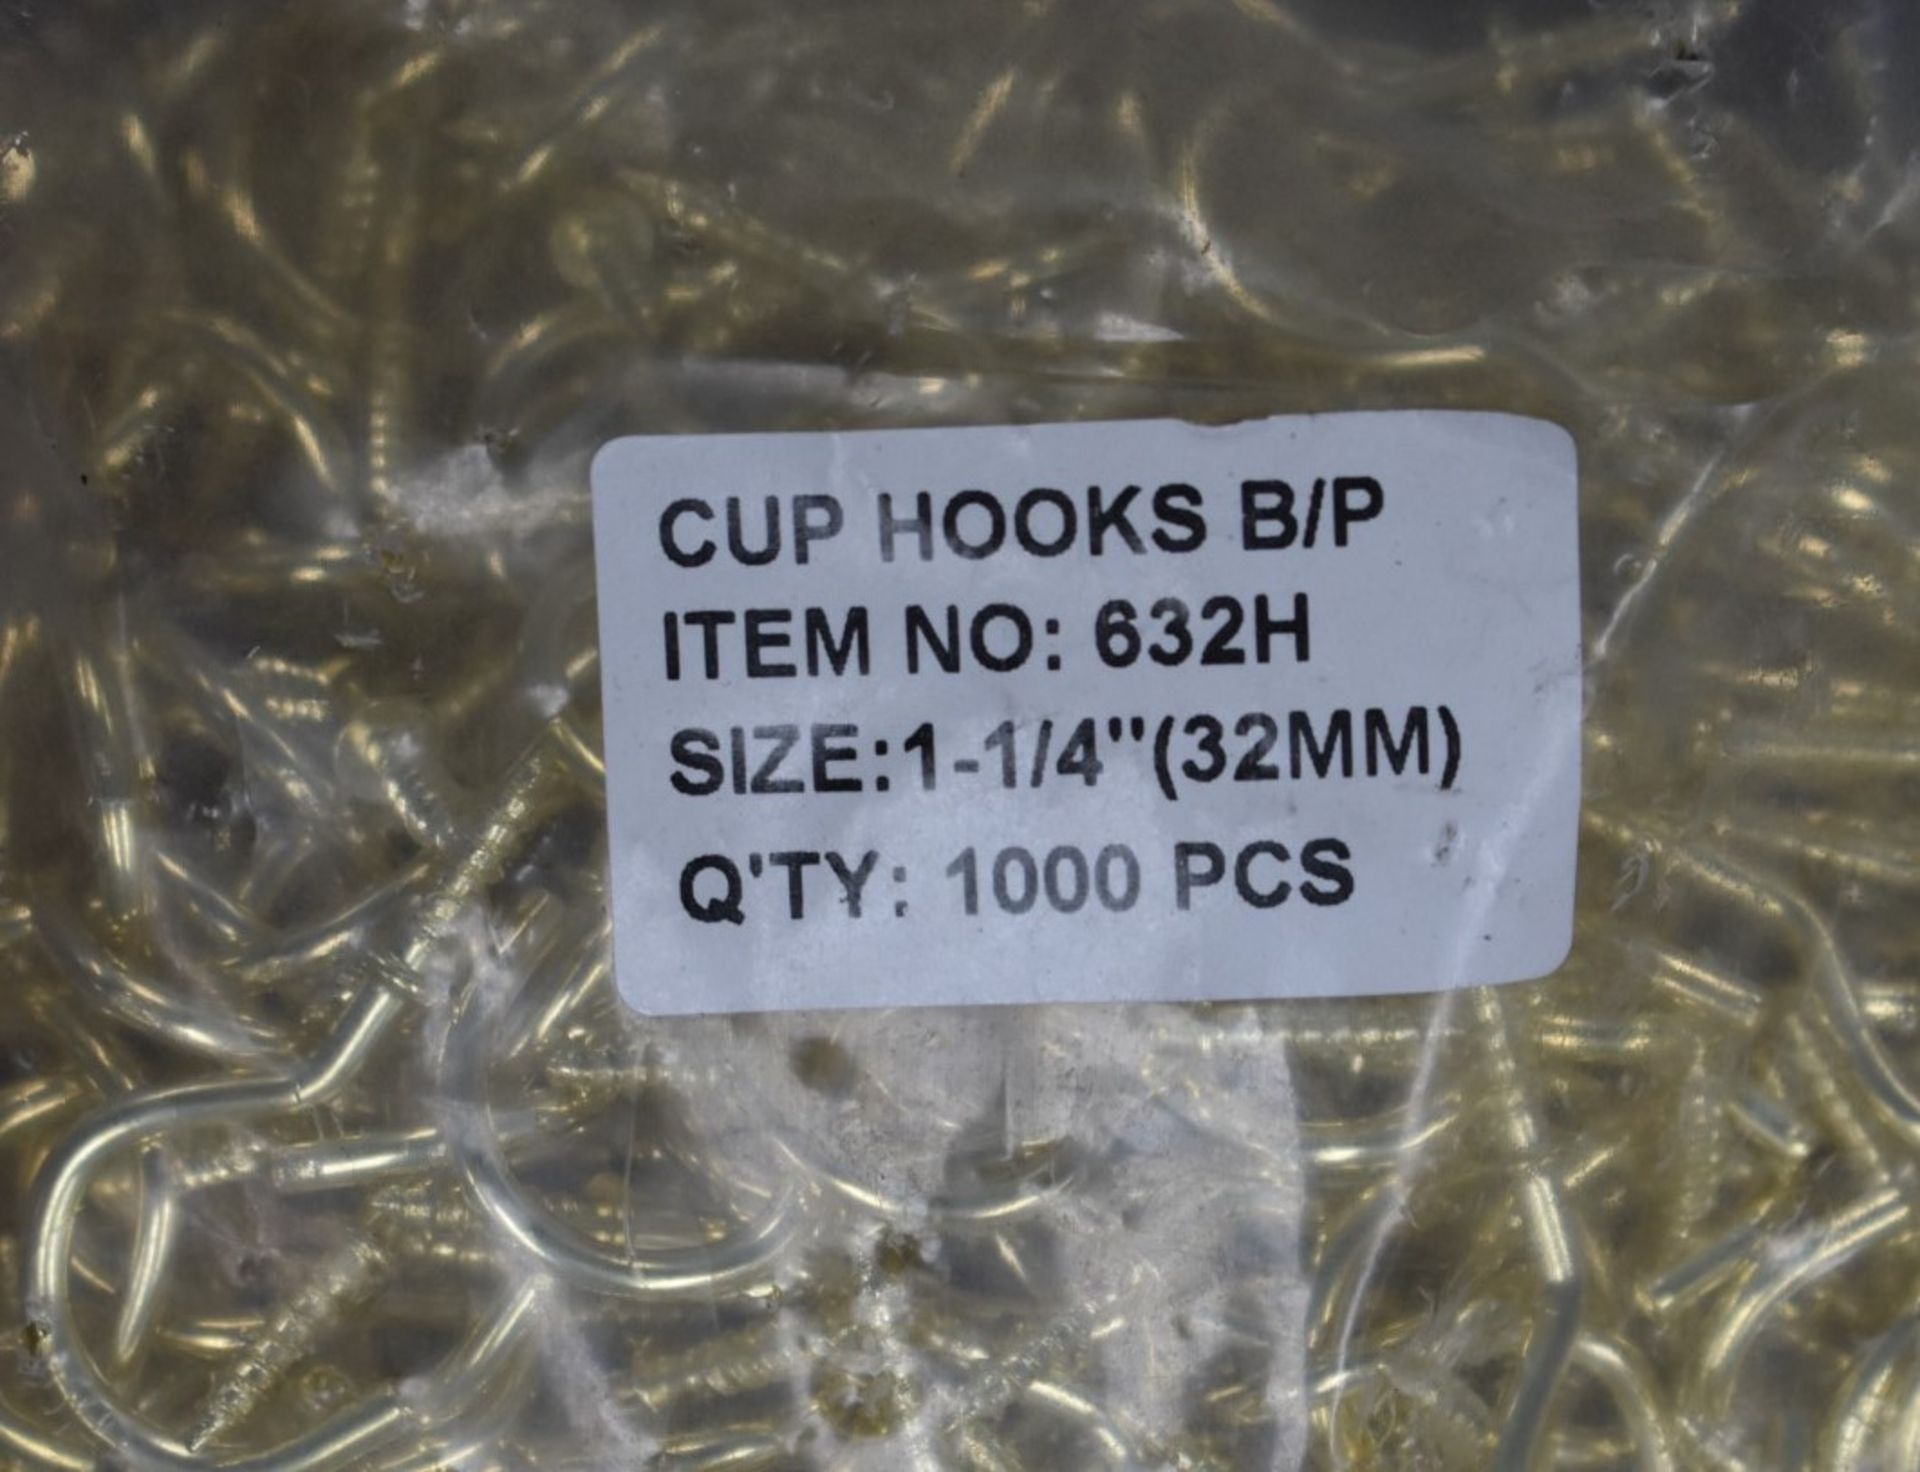 1,000 x Brass Plated Cup Screw Hooks - Product Code 632H - Size 1-1/4" 32mm - Supplied in 1 Bag of - Image 2 of 3